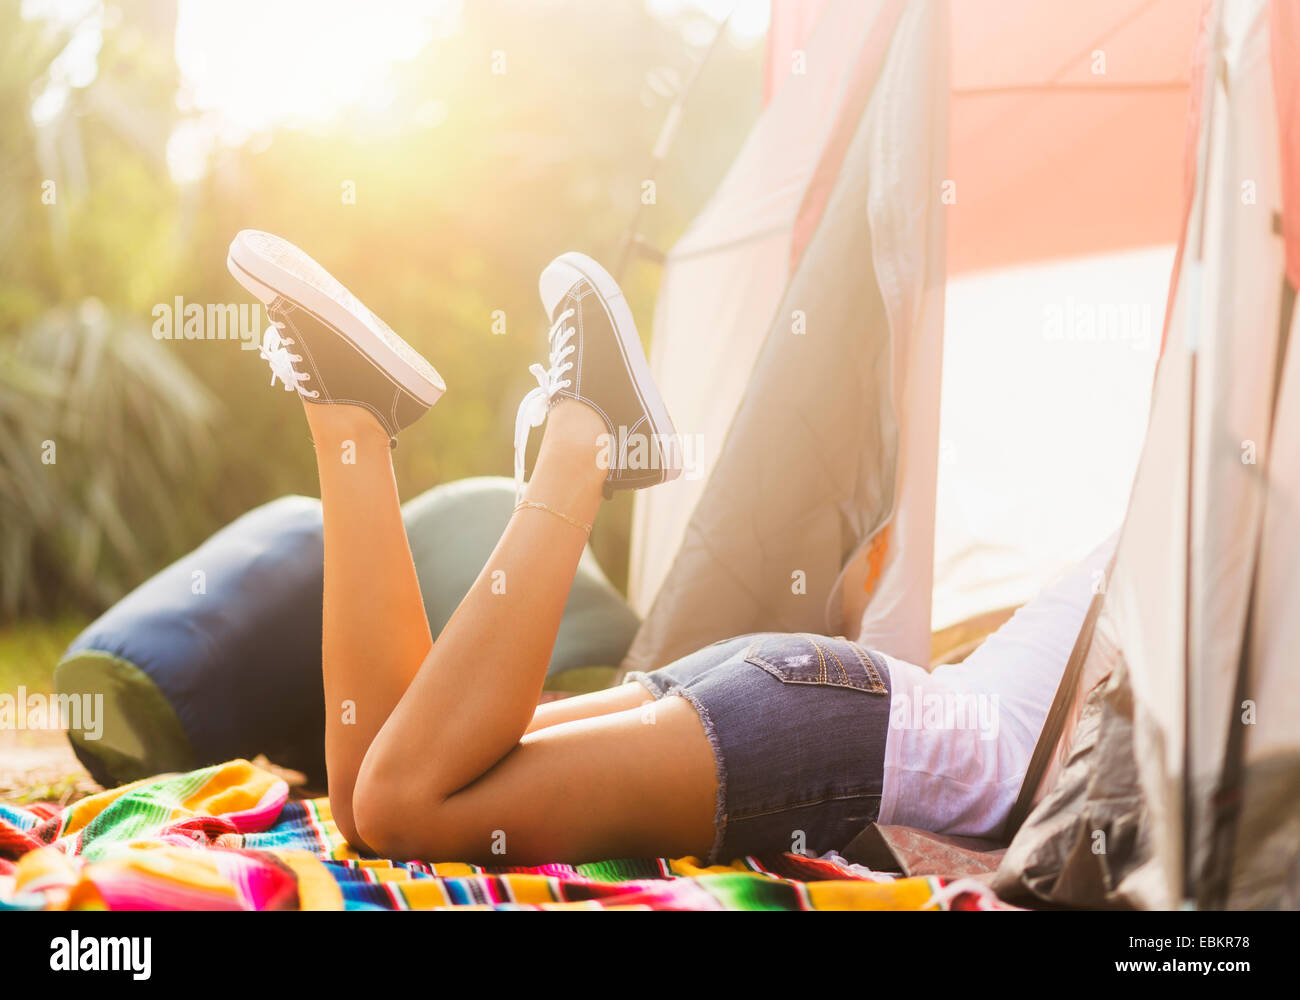 USA, Floride, Tequesta, Woman lying in tent Banque D'Images